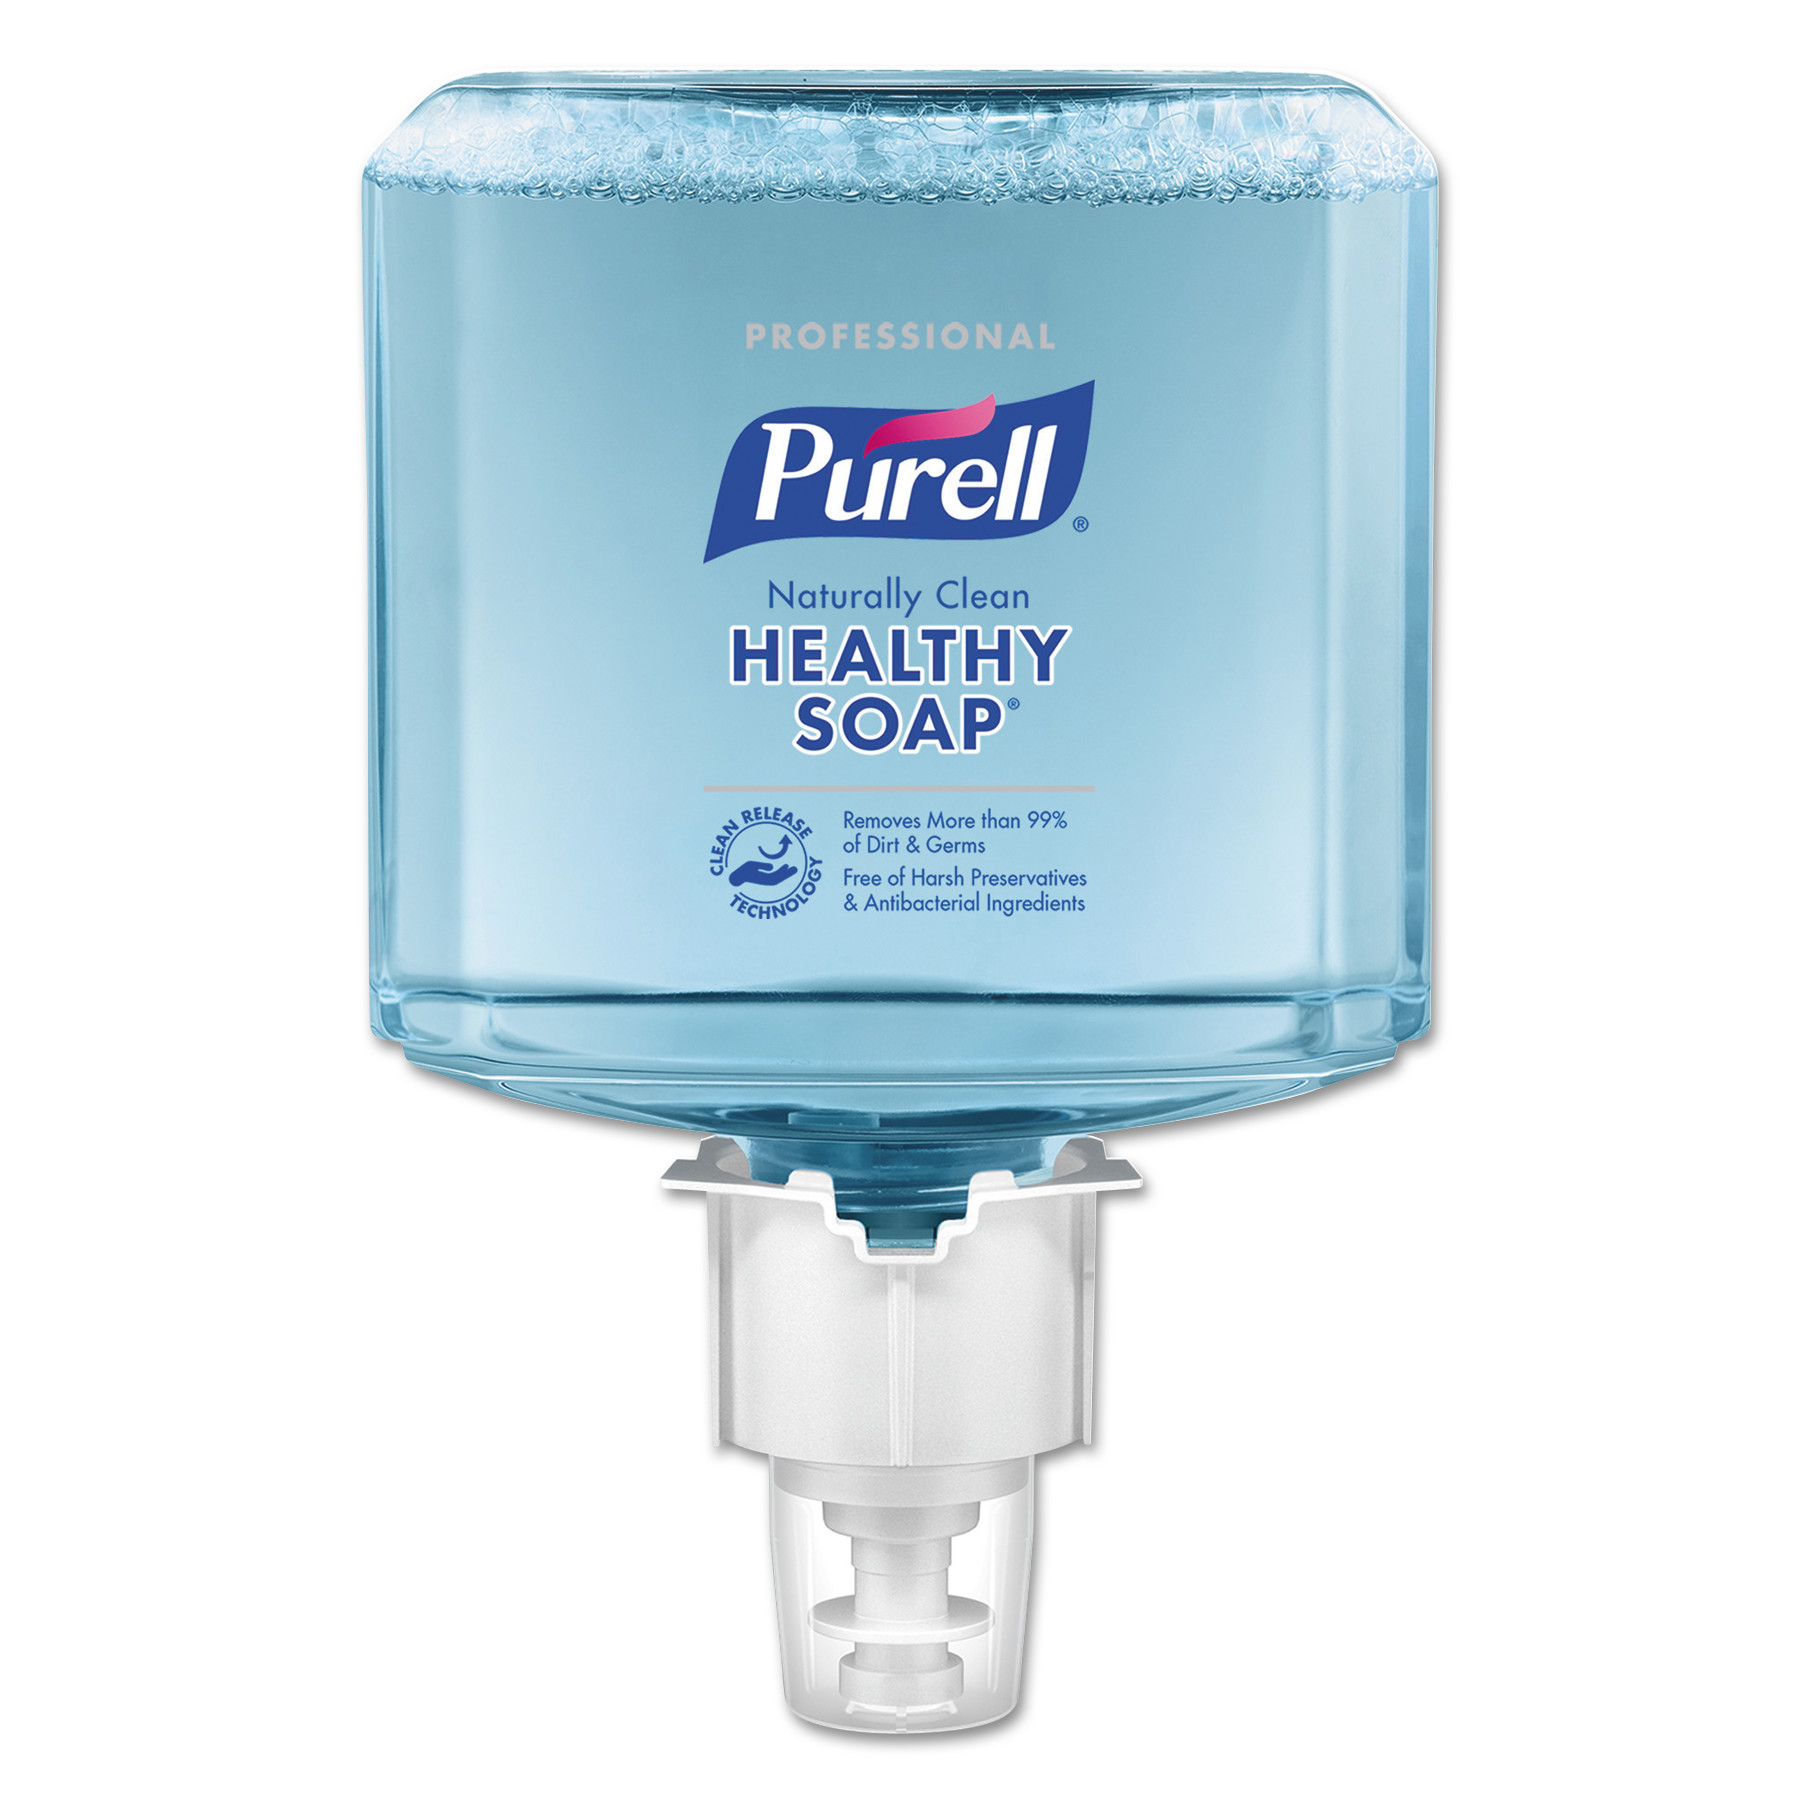  PURELL 5071-02 Professional CRT HEALTHY SOAP Naturally Clean Foam, For ES4 Dispensers, 2/CT (GOJ507102) 